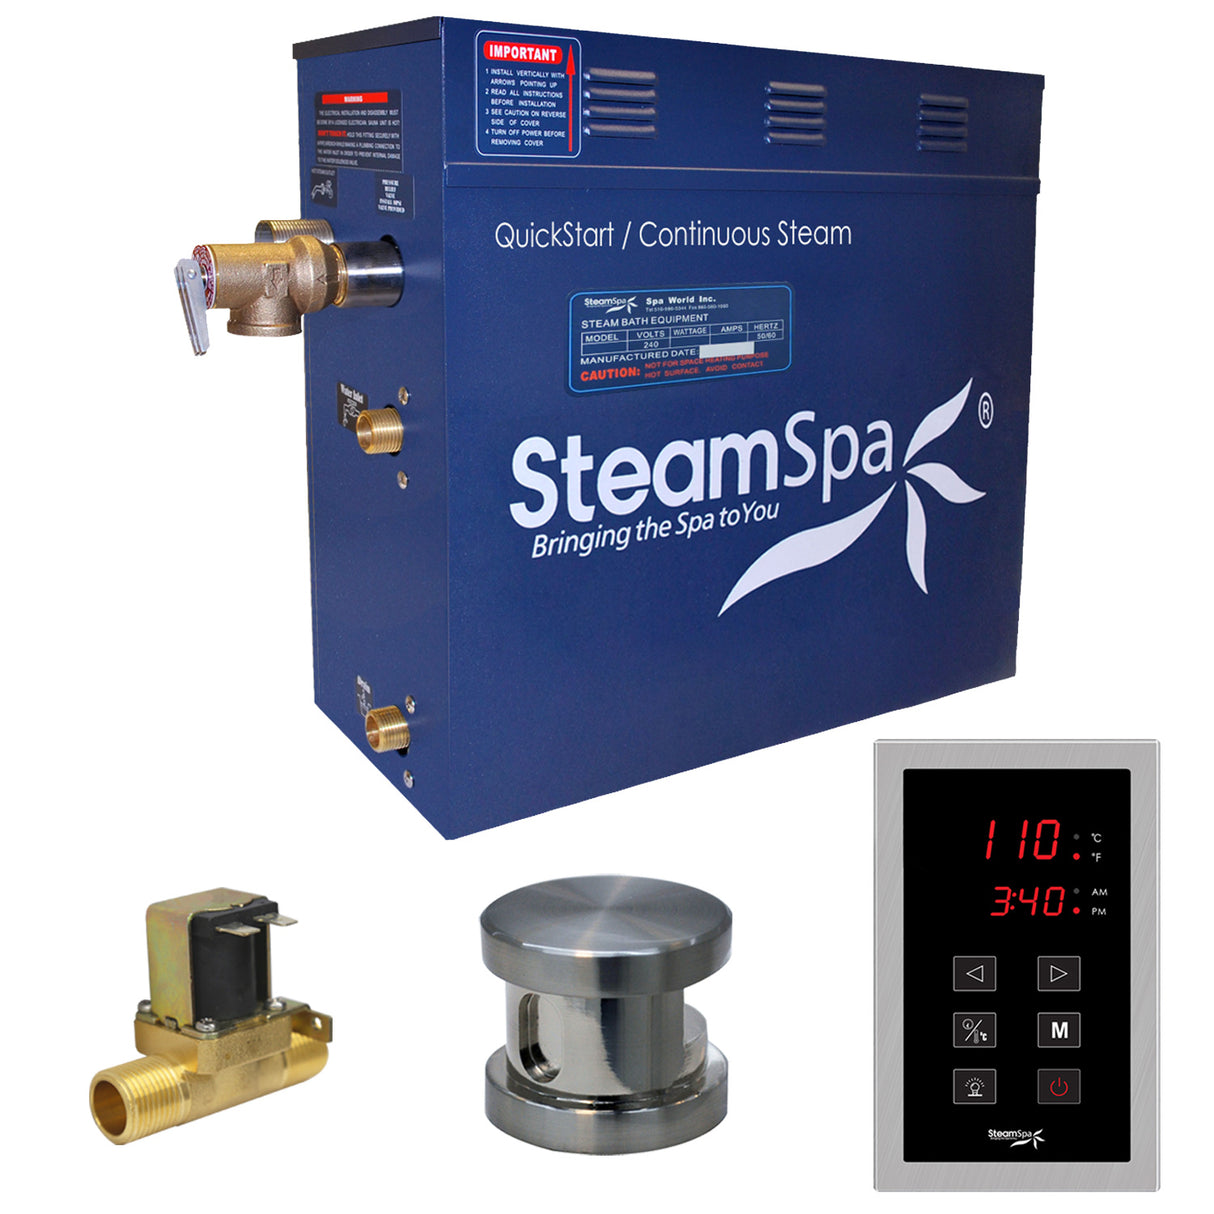 SteamSpa Oasis 9 KW QuickStart Acu-Steam Bath Generator Package with Built-in Auto Drain in Brushed Nickel OAT900BN-A